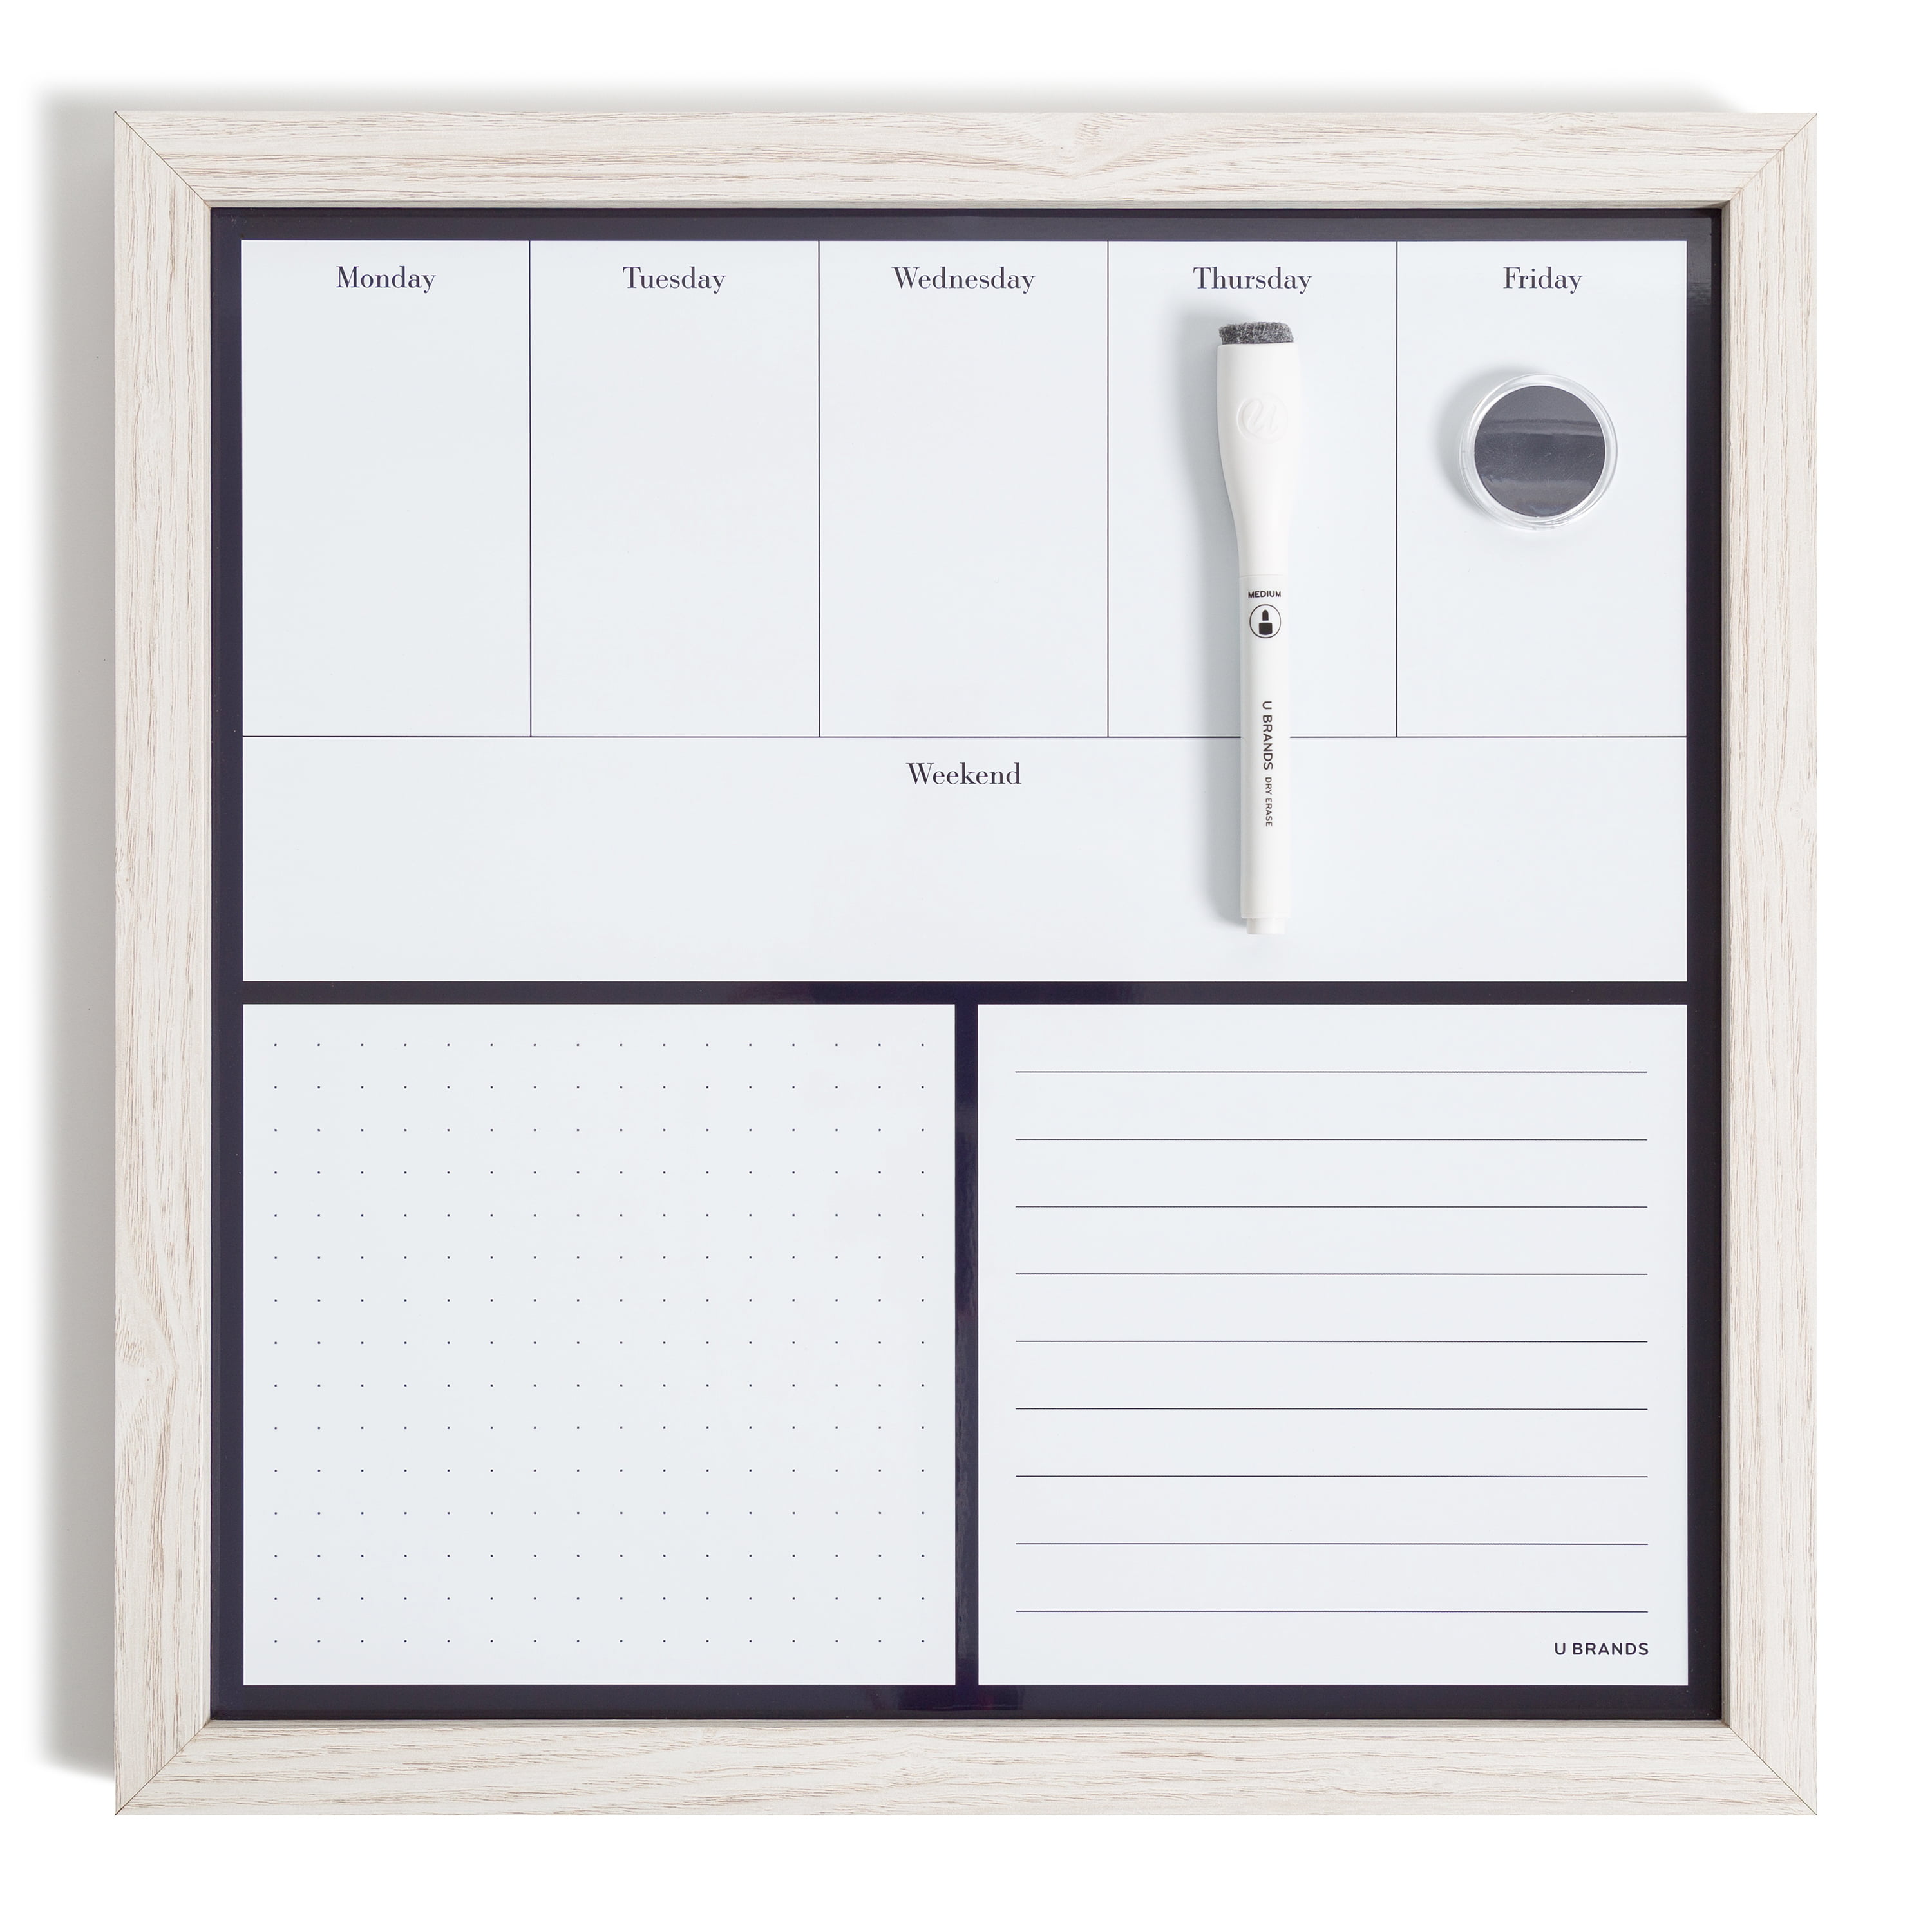 Dry Erase Magnetic White Board With Rustic Wooden Frame 24"x36" 